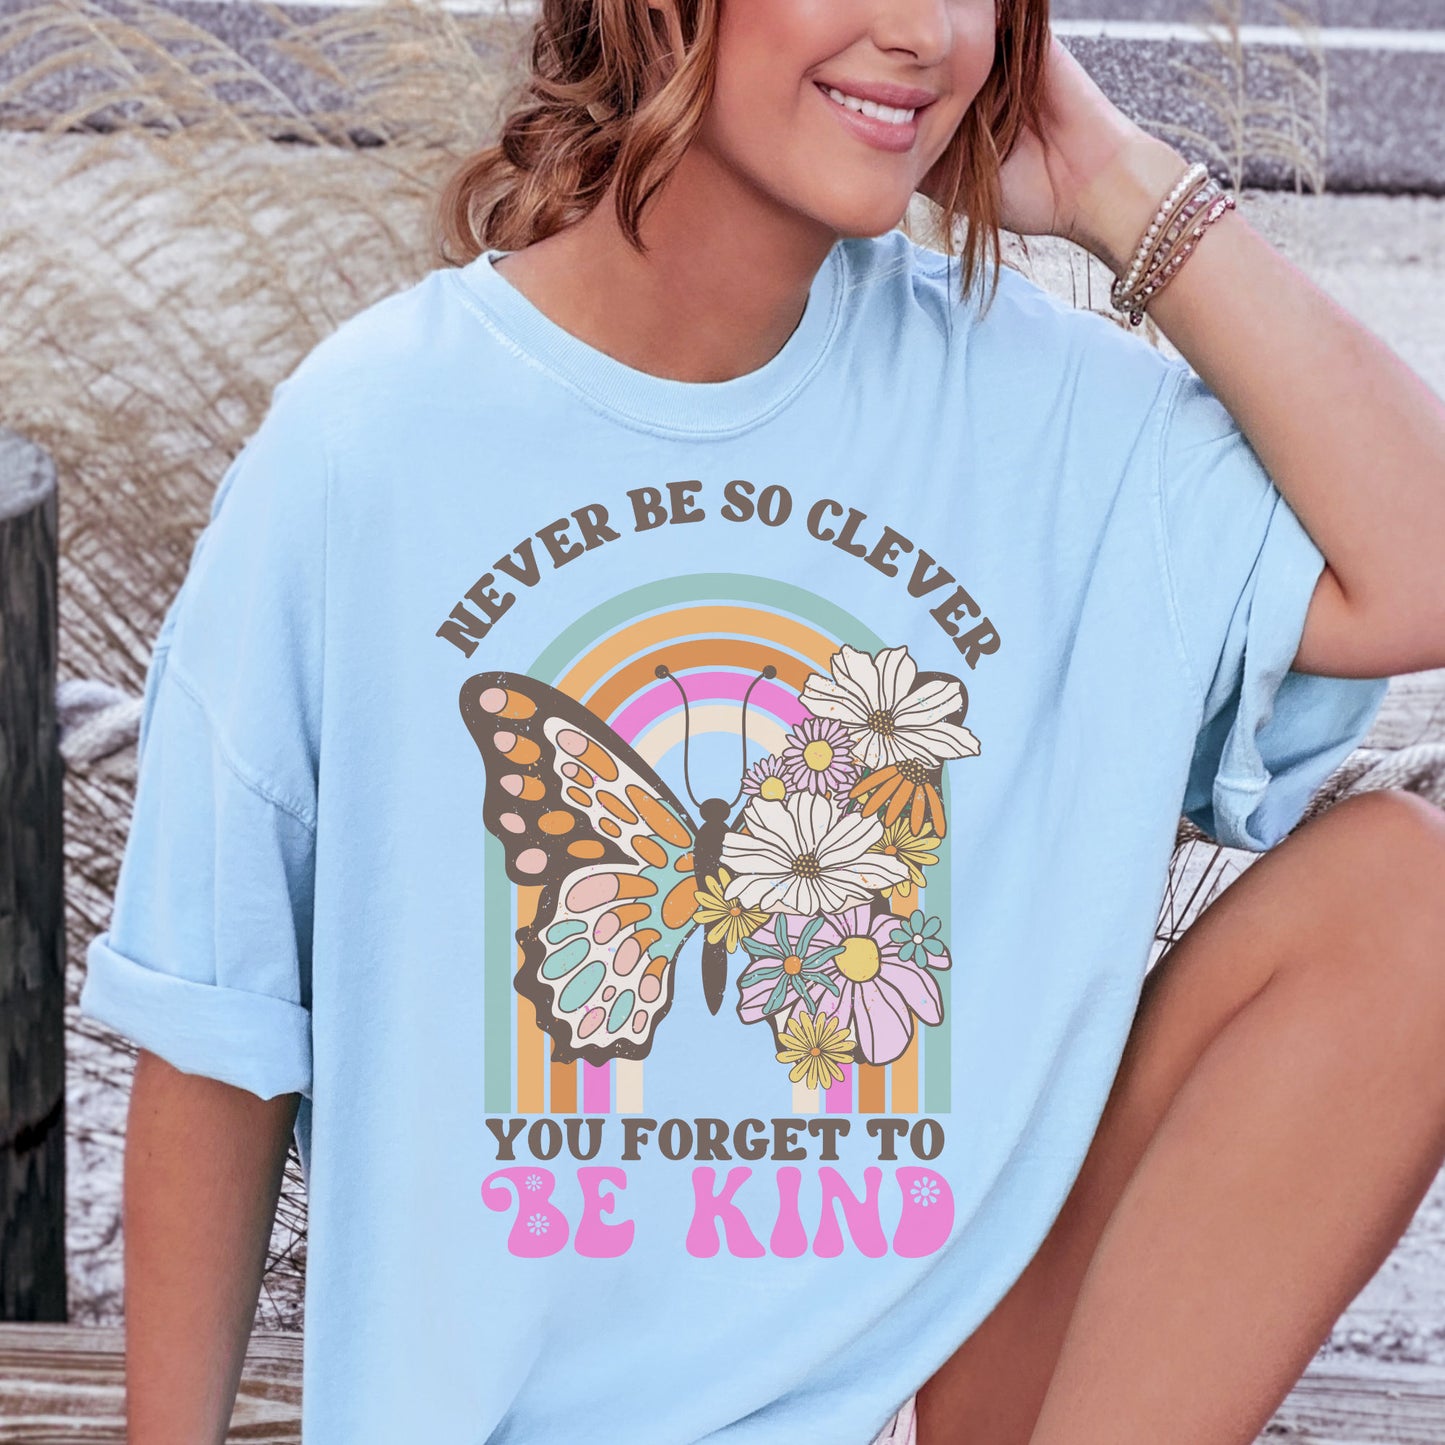 Never Be So Clever shirt, Never Be So Kind, Marjorie Shirt, Evermore Merch, Evermore shirt, Marjorie Taylor, Comfort Colors